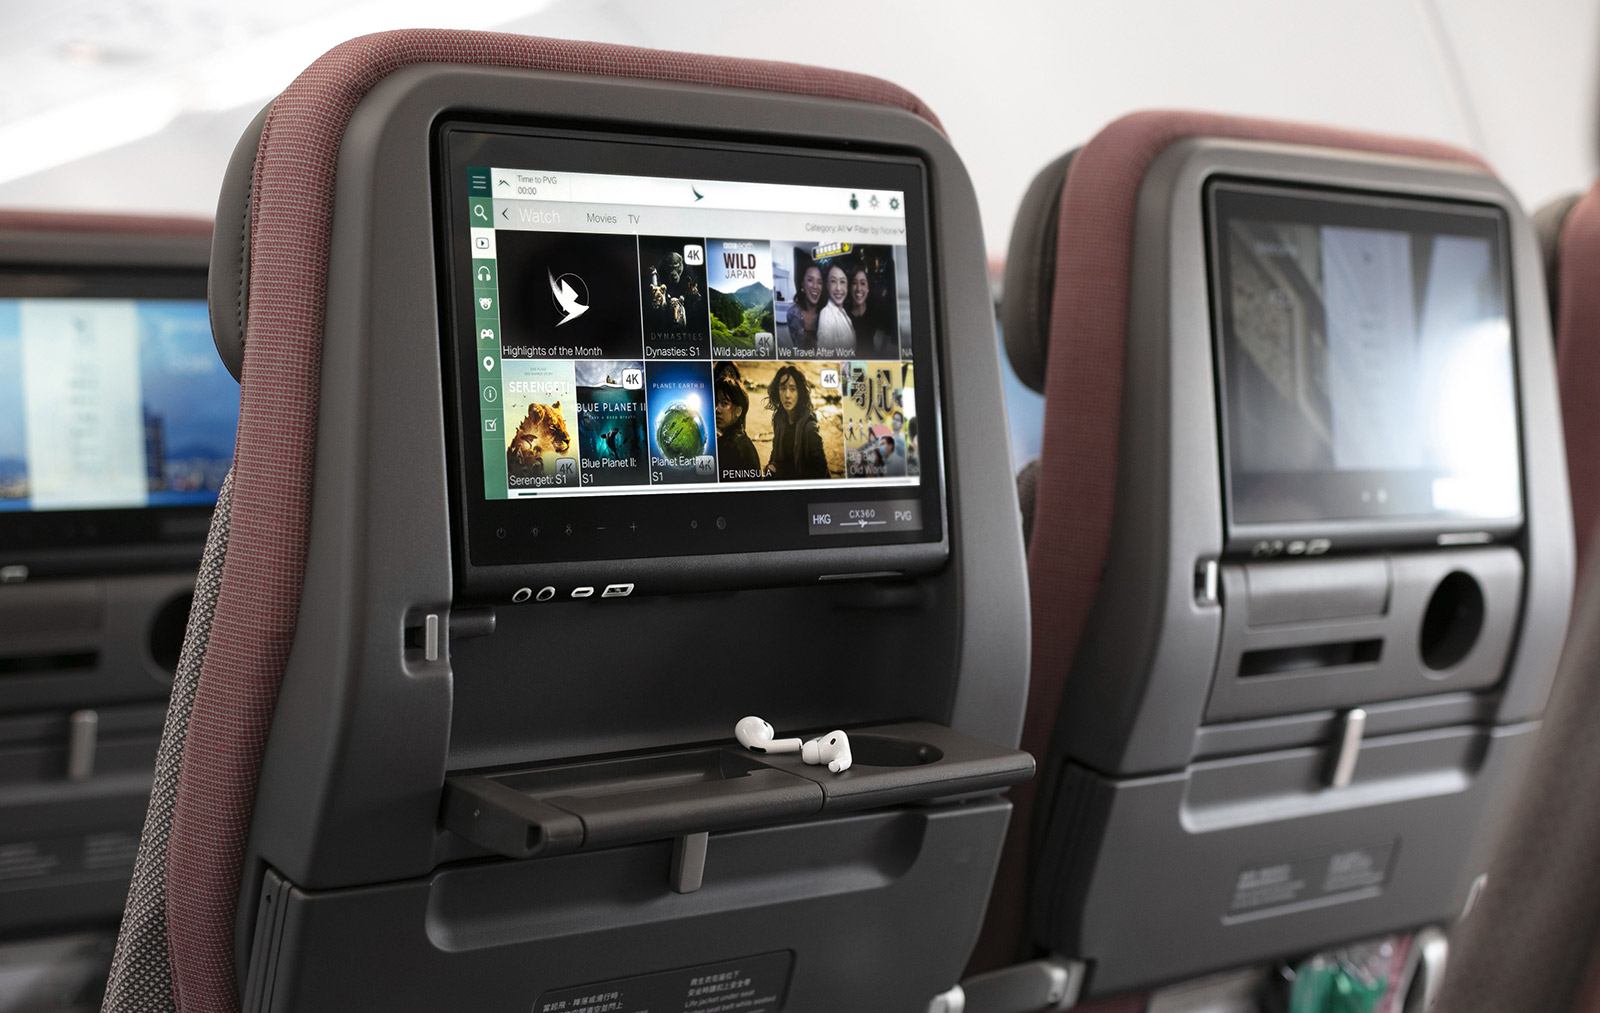 4K resolution screens in economy class on Cathay Pacific's new Airbus A321neo